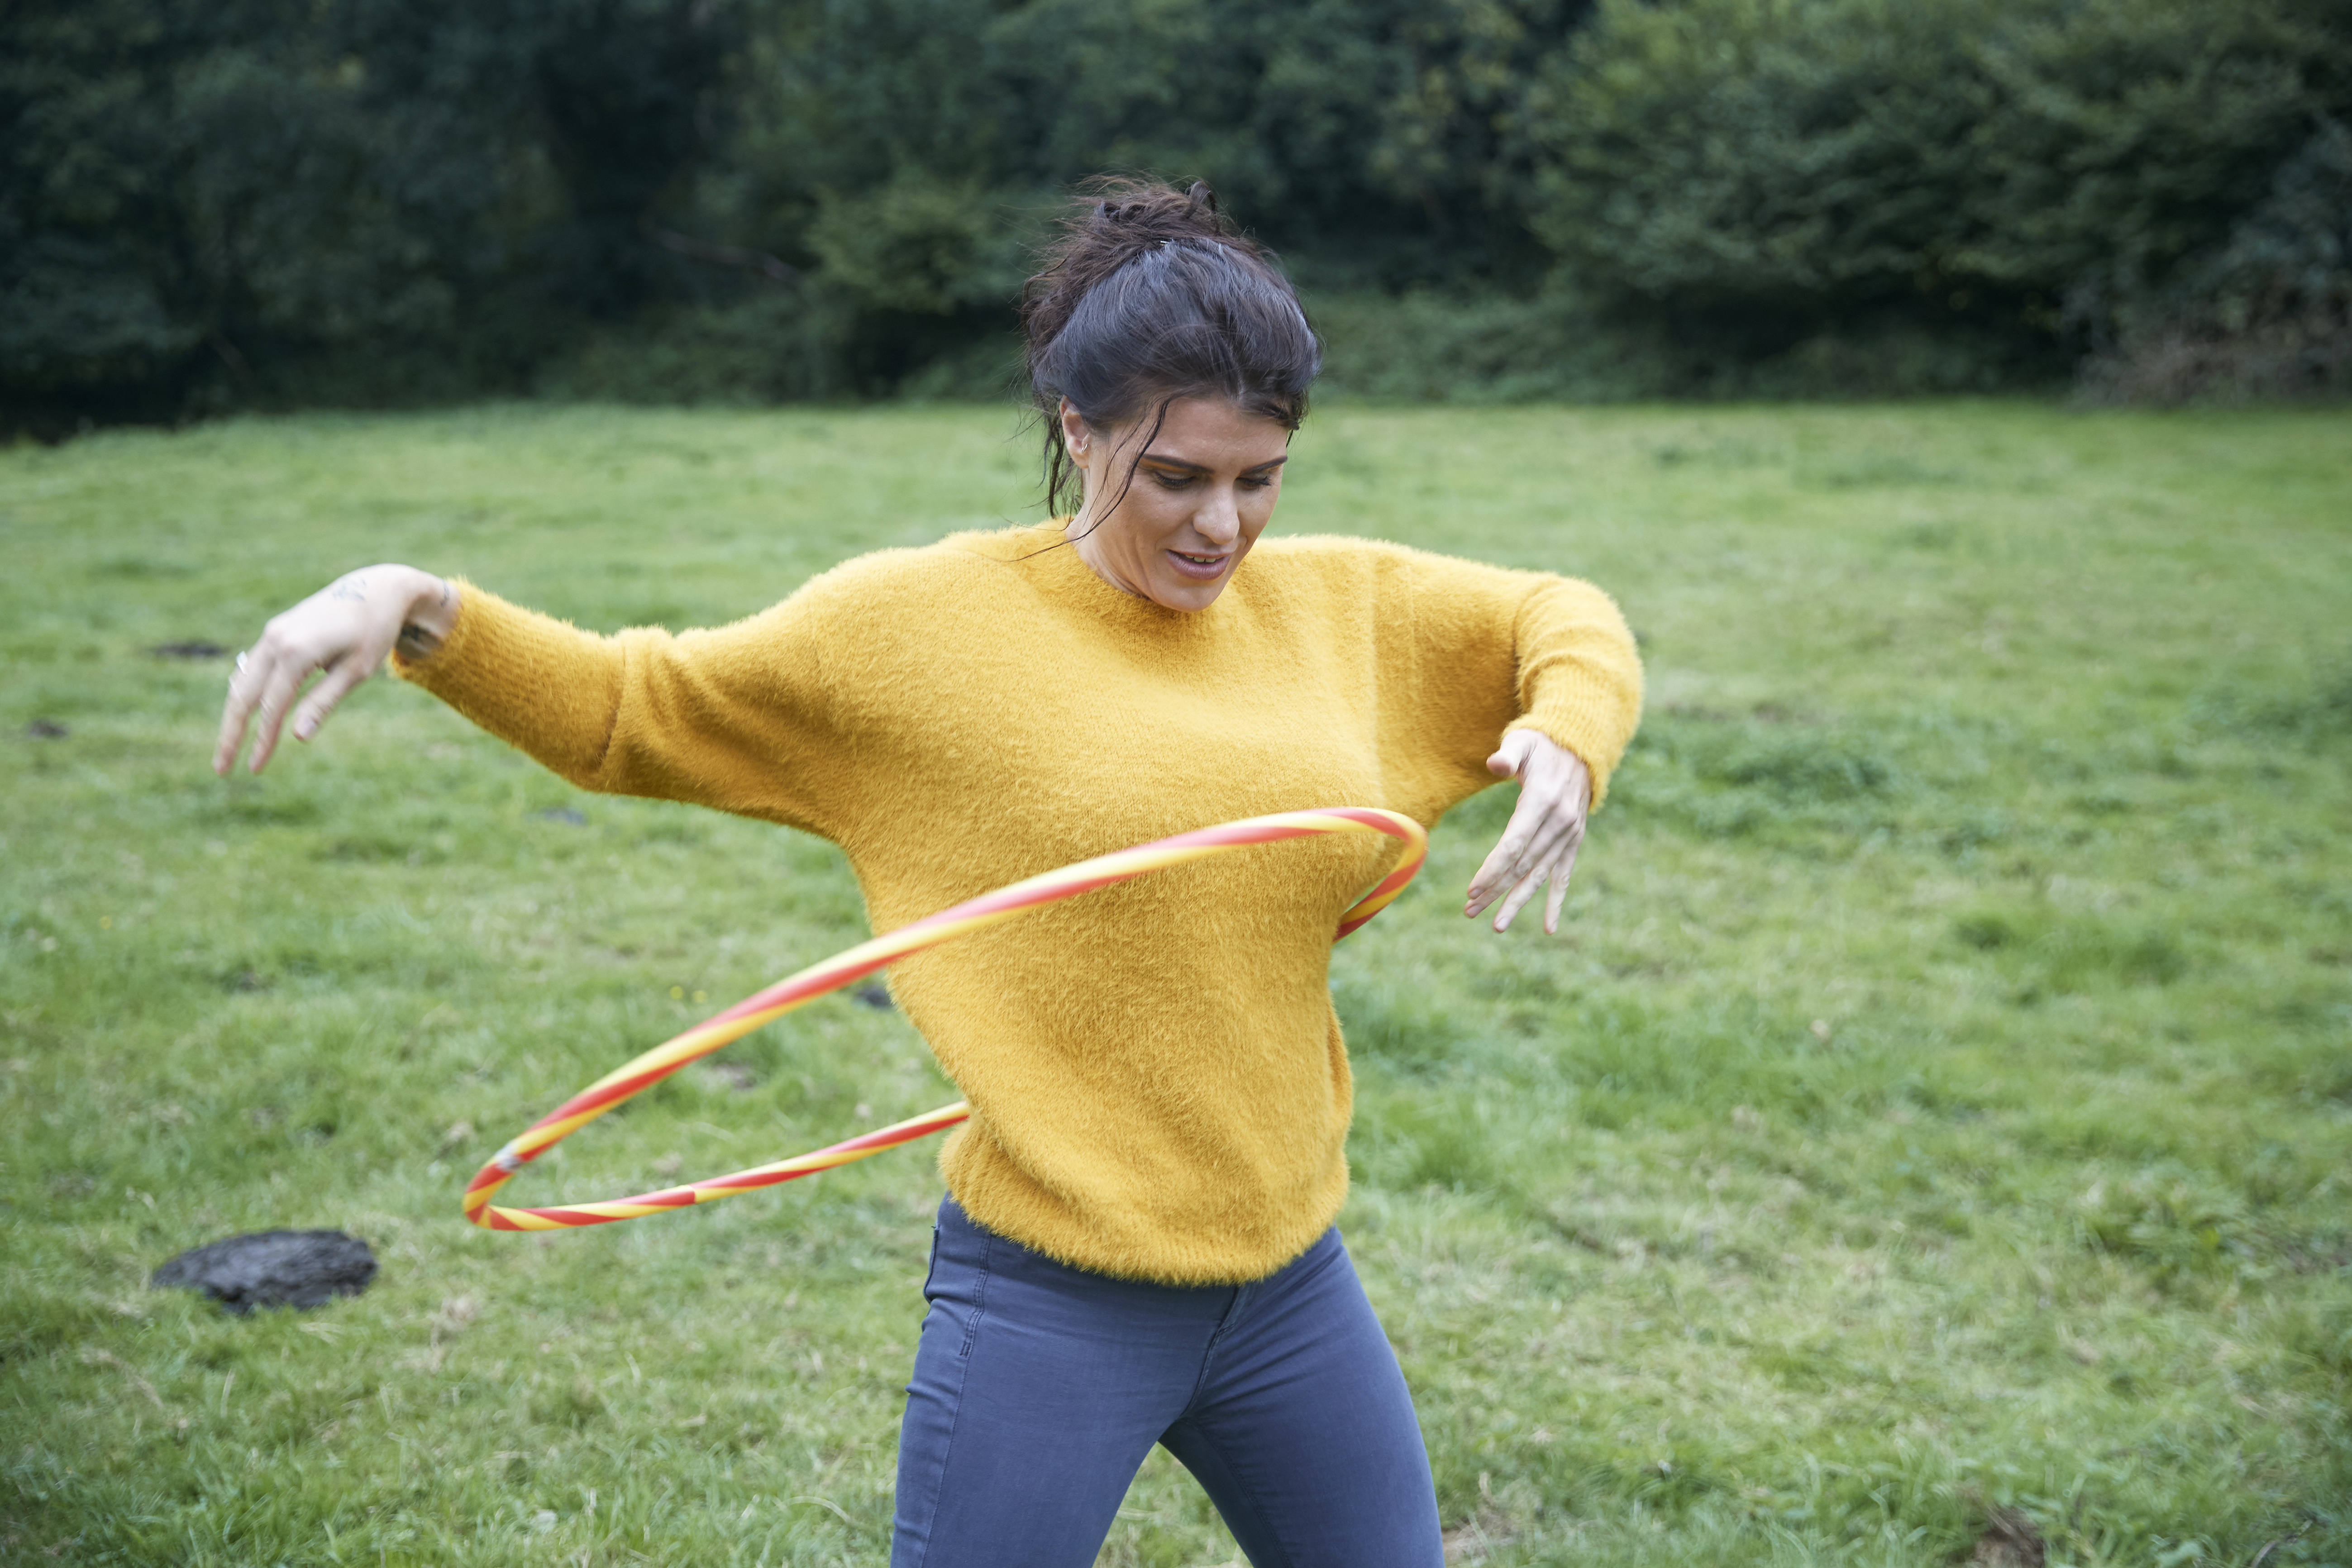 Why Hula Hooping Should Be Part Of Your Workout Routine